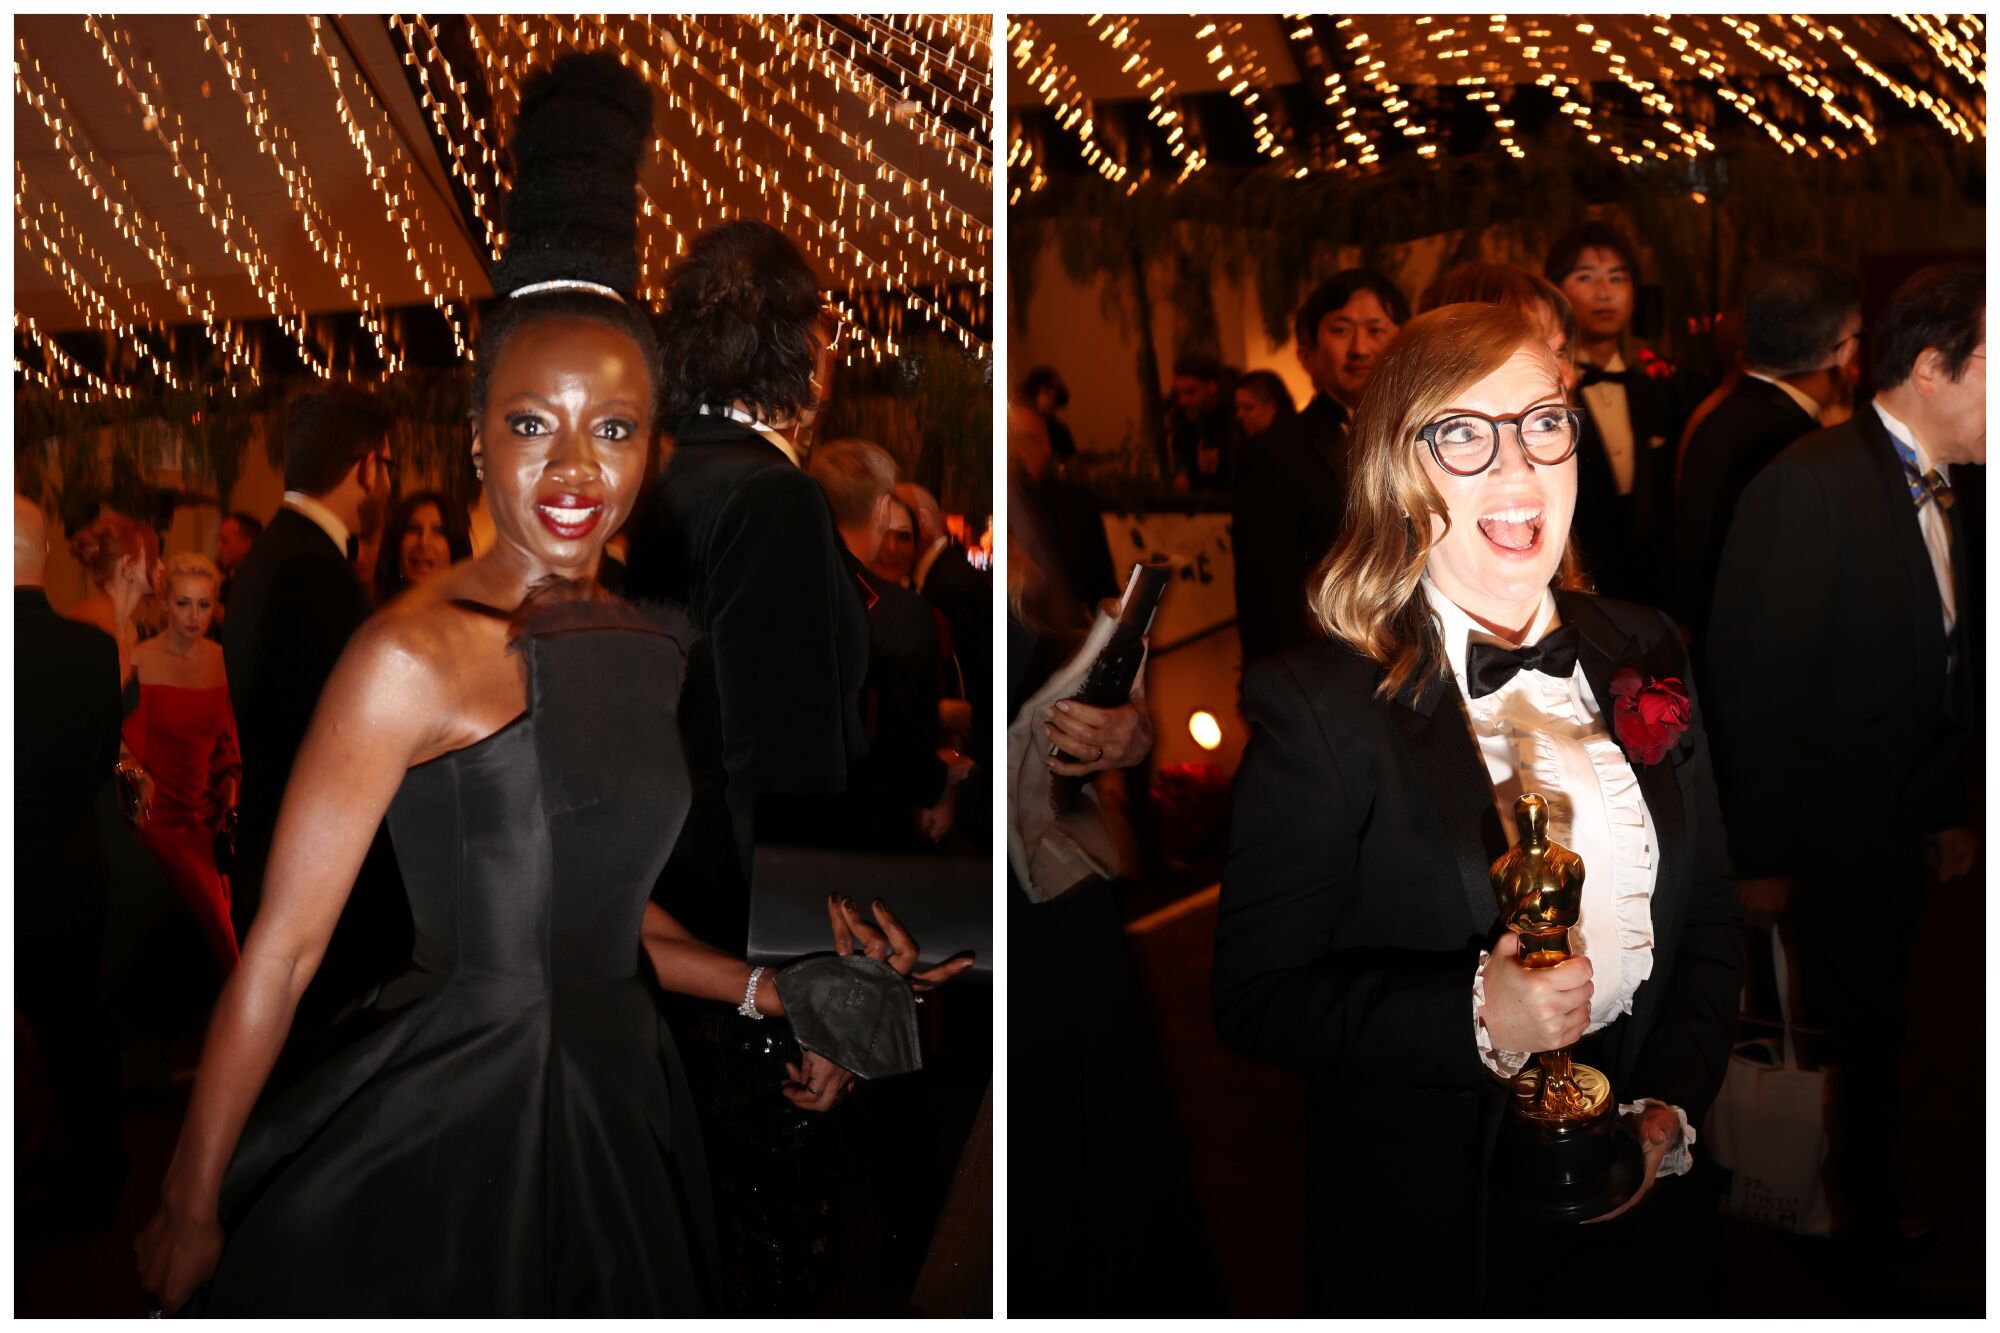 Danai Gurira and Sarah Polley stand amid a crowd under rows of white lights.